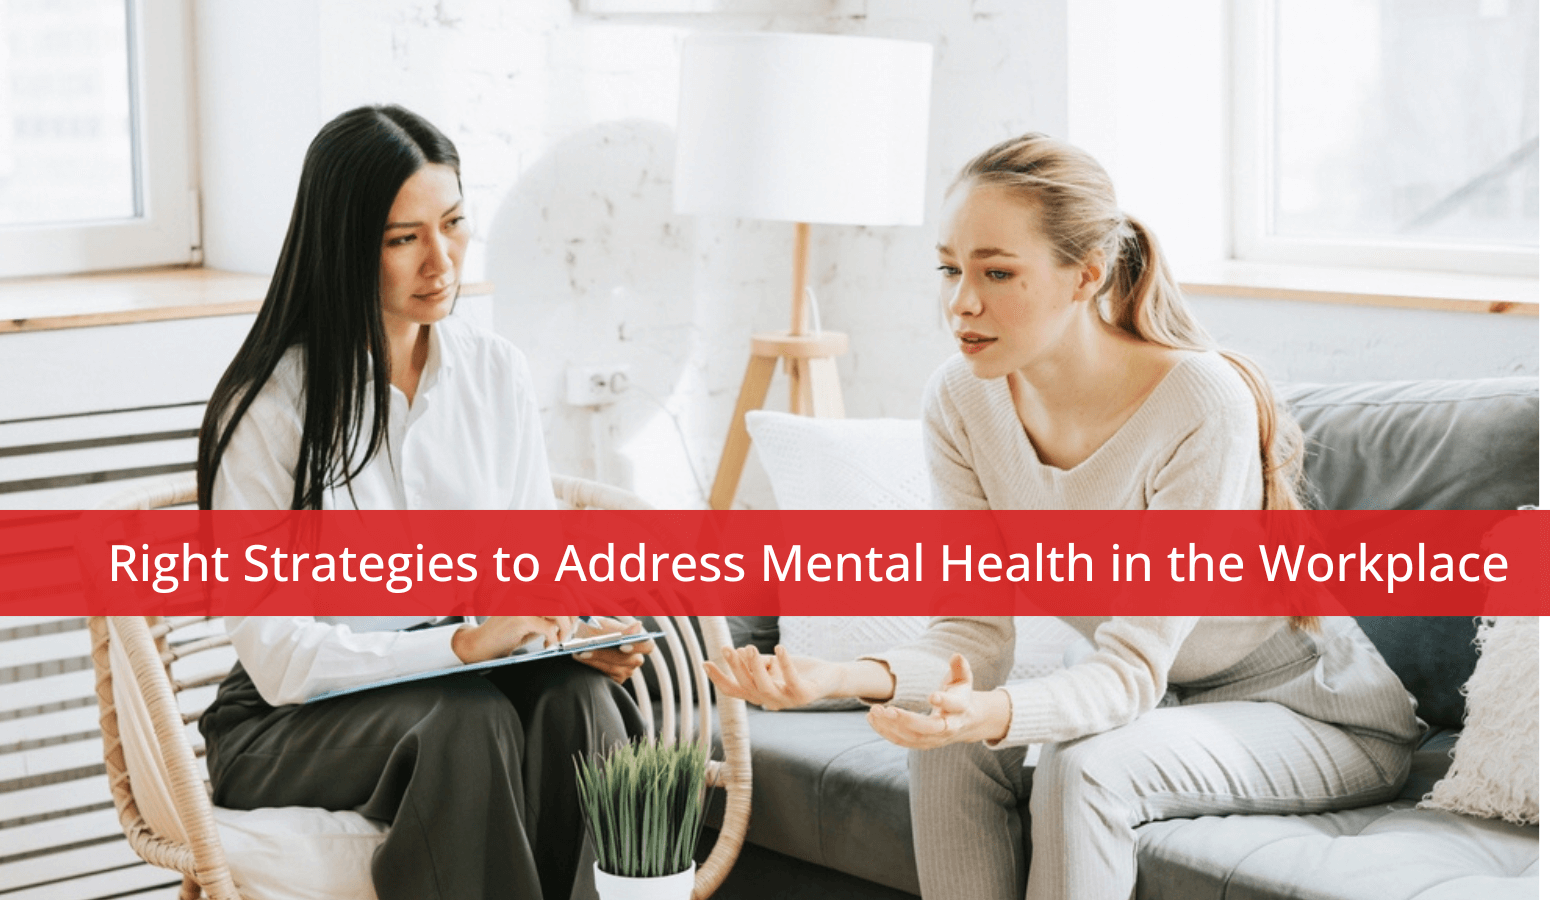 Featured image for “Right Strategies to Address Mental Health in the Workplace”